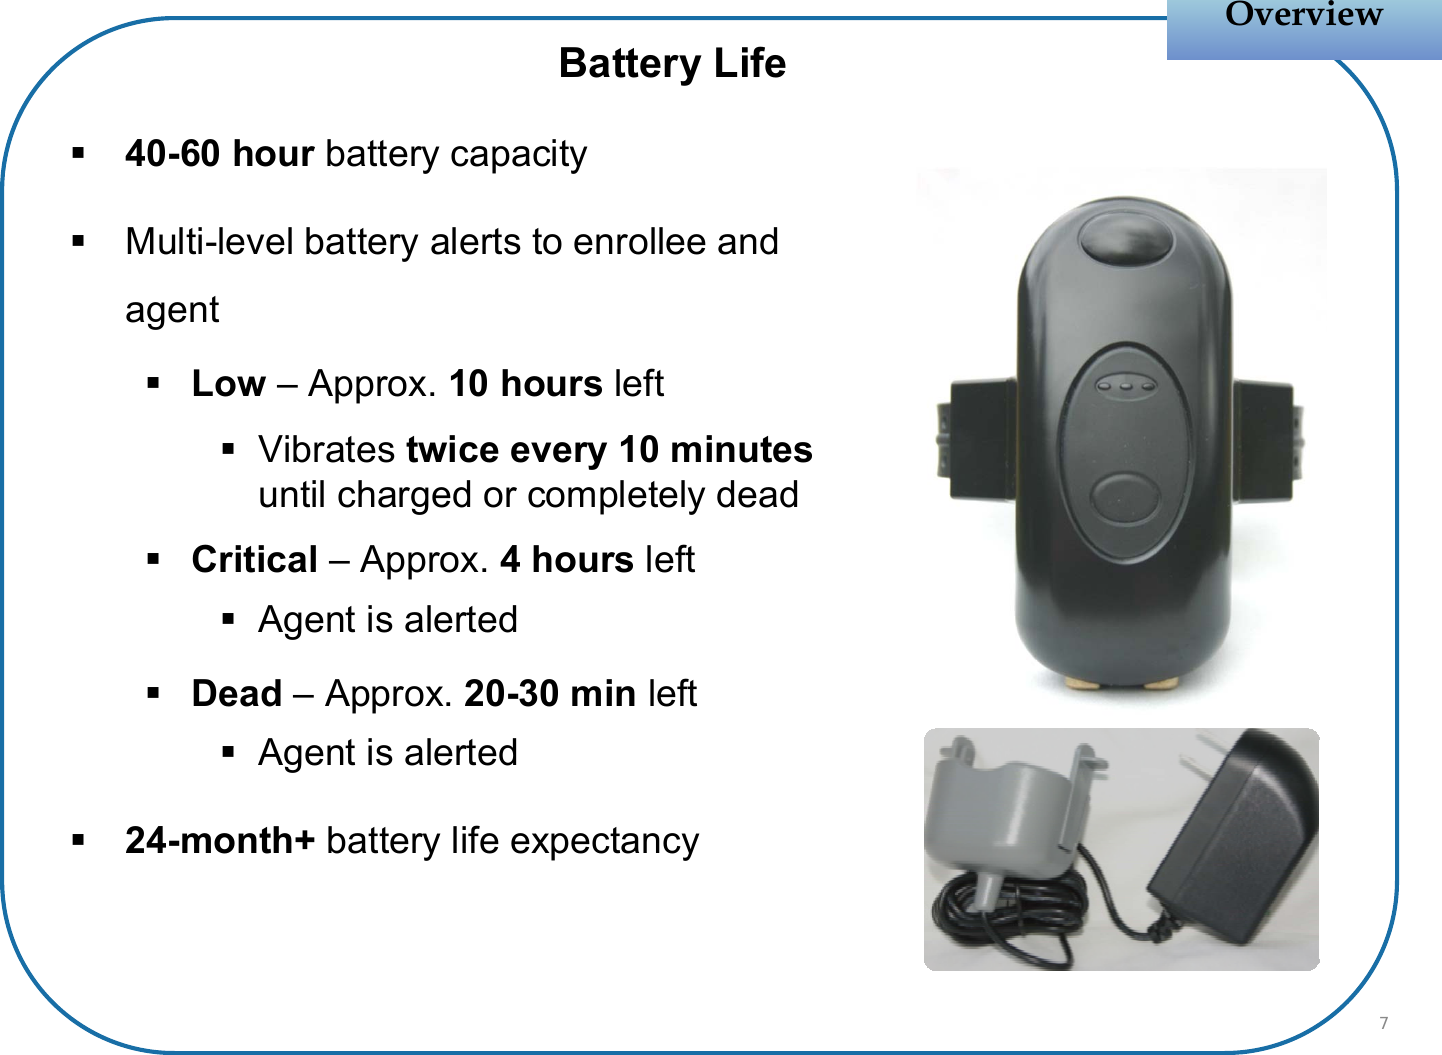 40-60 hour battery capacityMulti-level battery alerts to enrollee and agentLow – Approx. 10 hours leftVibrates twice every 10 minutes until charged or completely deadCritical – Approx. 4 hours leftAgent is alertedDead – Approx. 20-30 min leftAgent is alerted24-month+ battery life expectancyOverviewOverviewBattery Life7